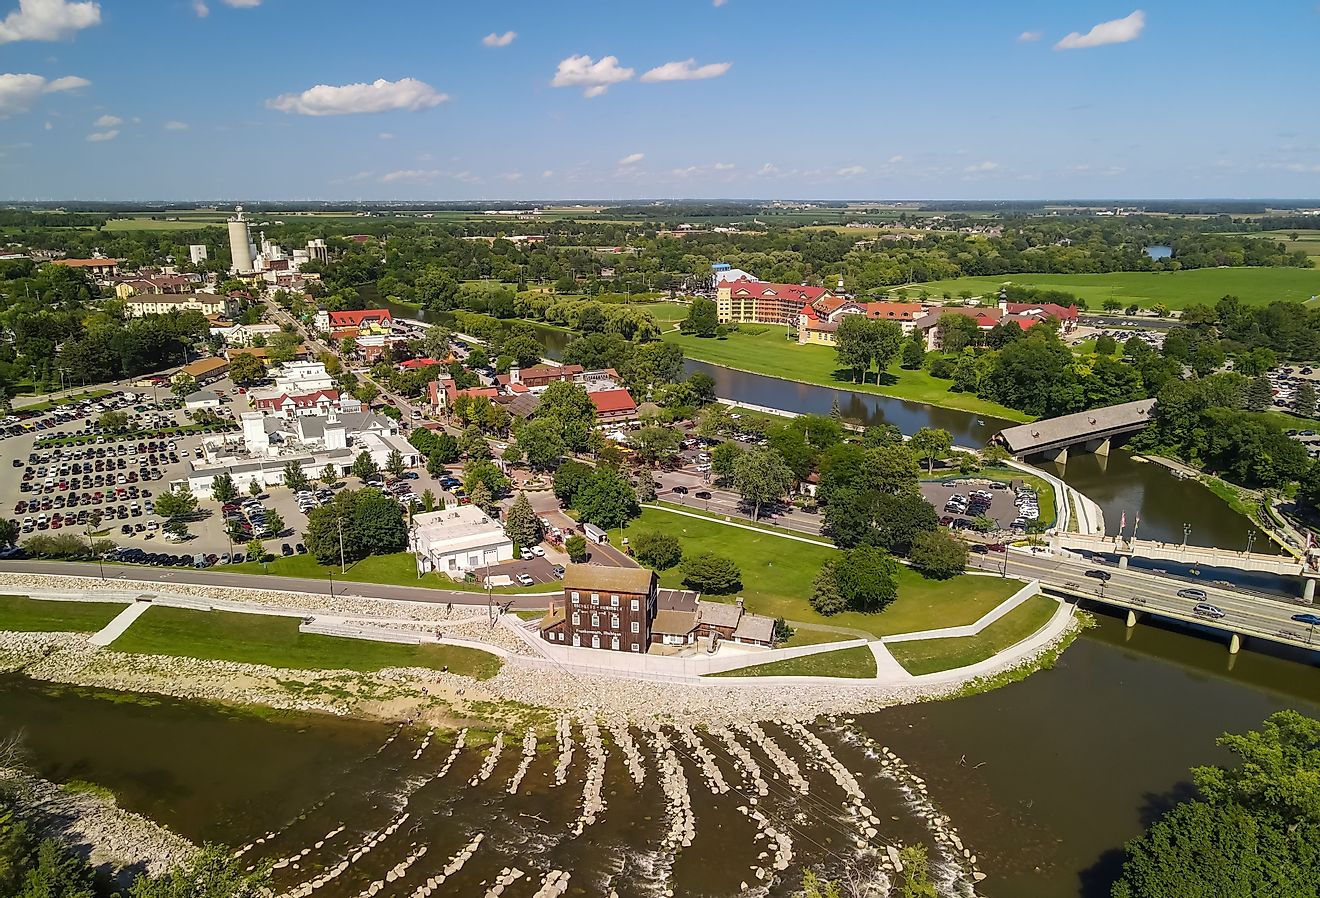 Aerial view of Frankenmuth city in Michigan, known for its Bavarian-style architecture. Image credit SNEHIT PHOTO via Shutterstock